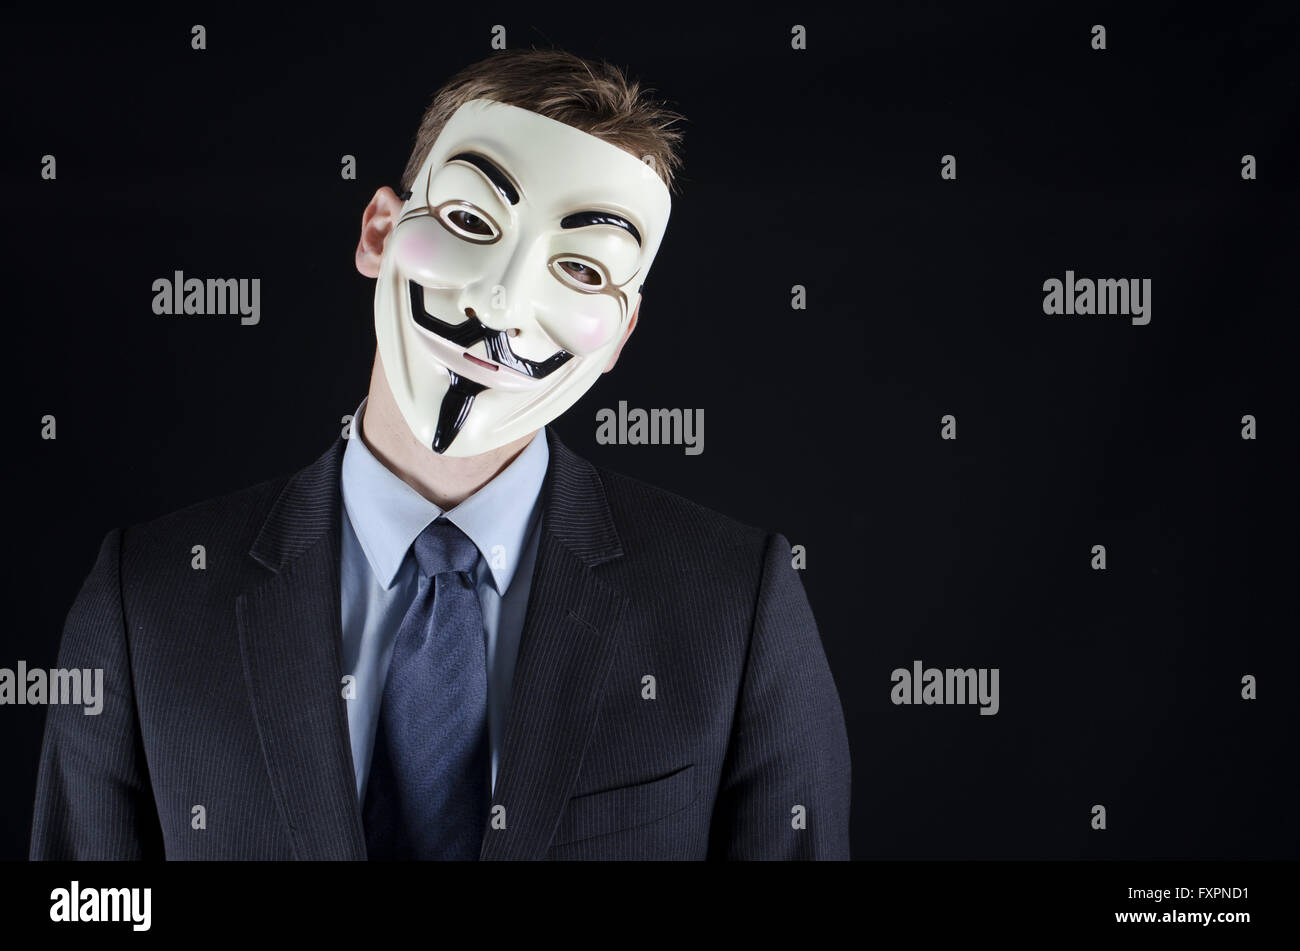 Man in suit with v for vendetta mask on black background Stock Photo